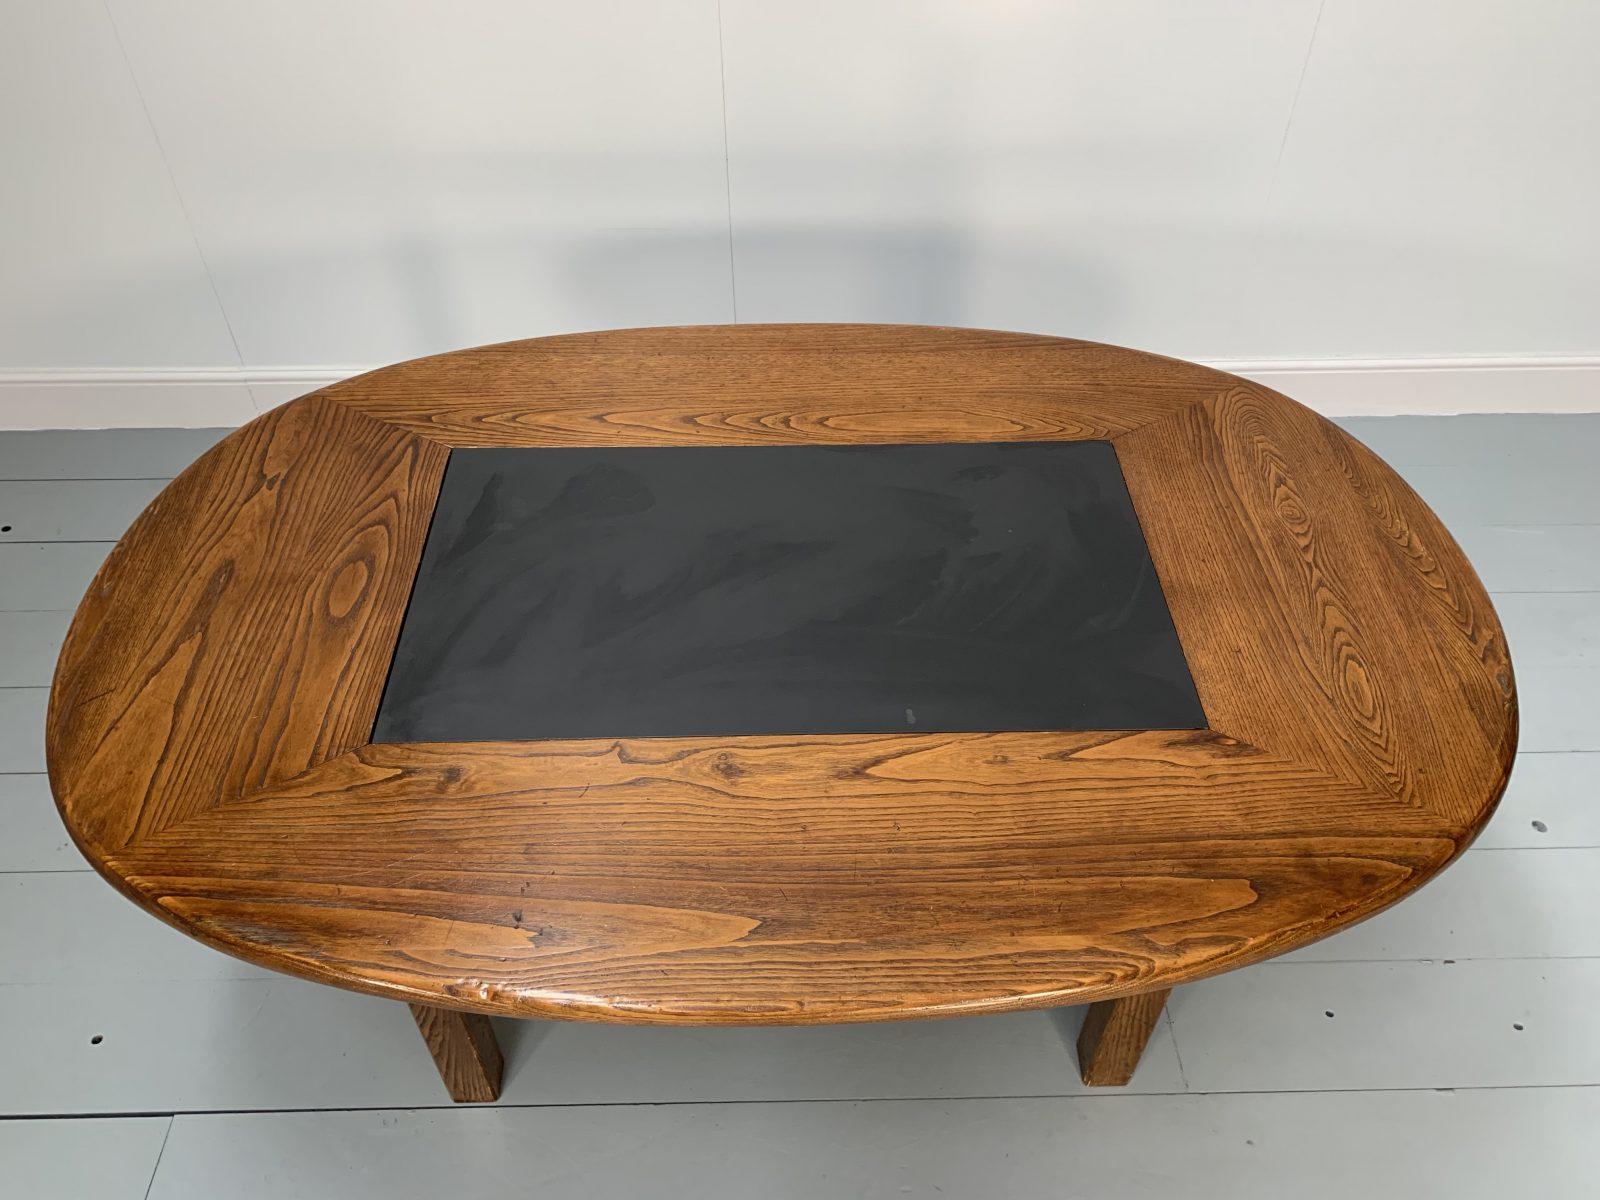 Superb William Yeoward Oval Dining Table in Chestnut and Slate For Sale 1